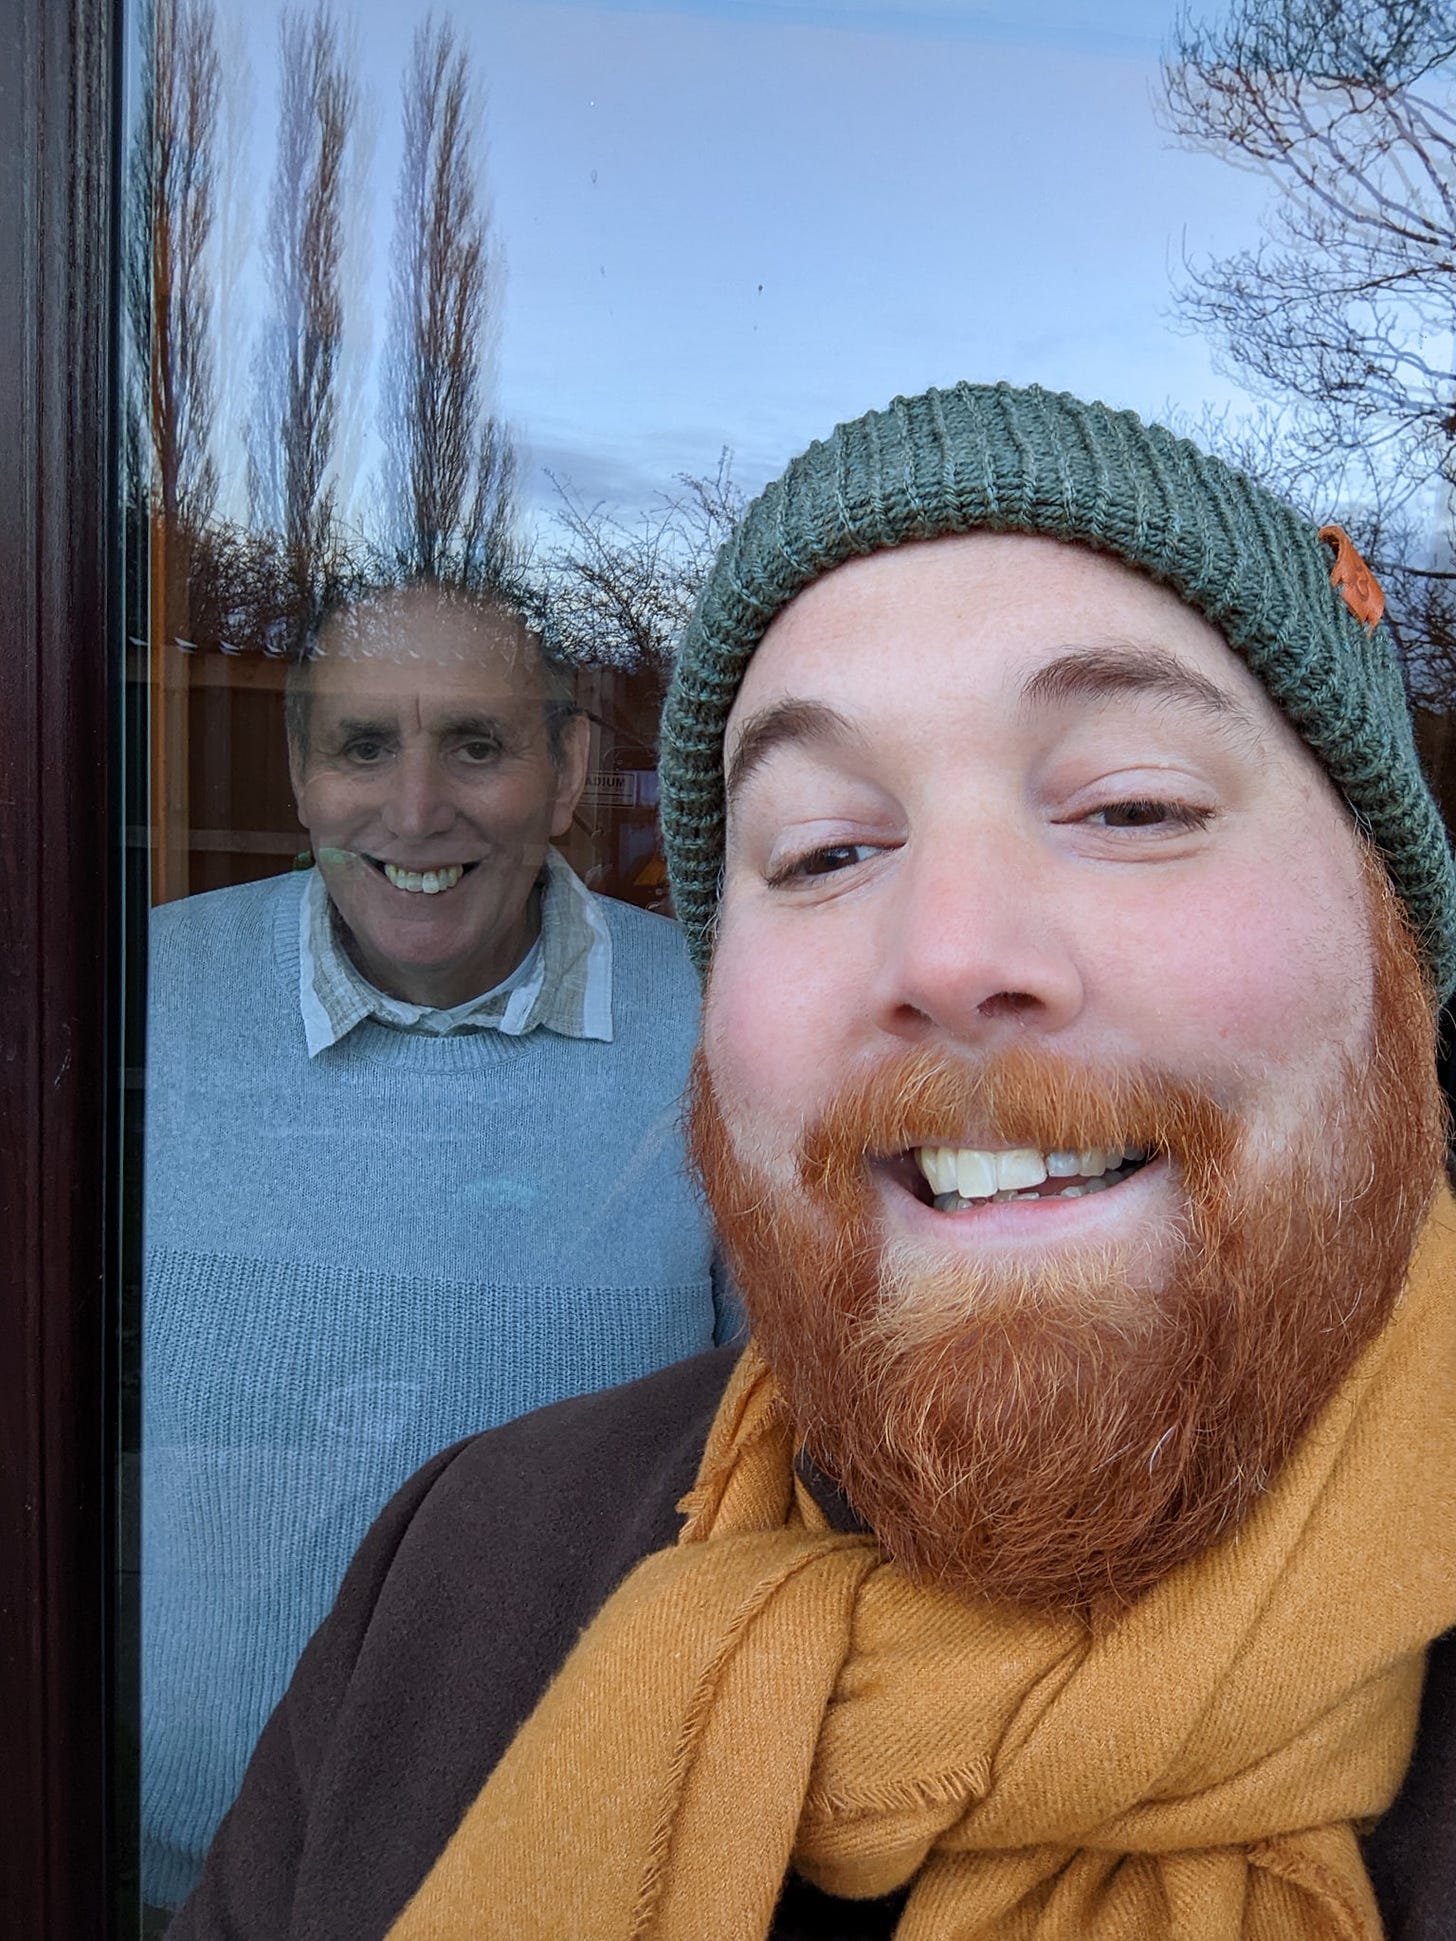 A selfie of my dad and I, with the window separating us during the restrictions in place due to COVID-19 in 2021. 